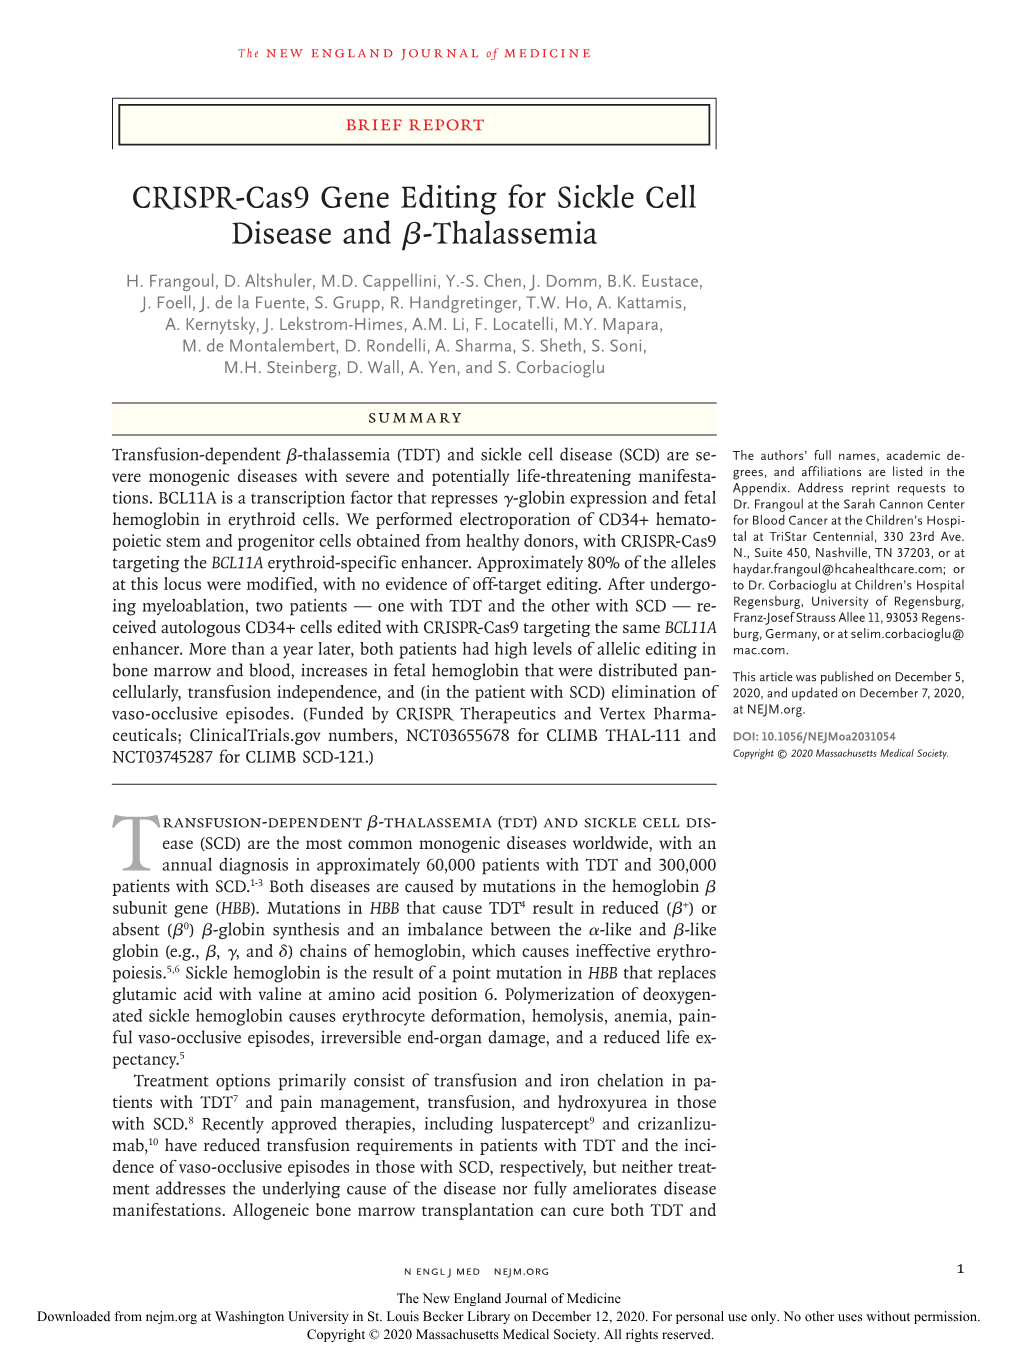 CRISPR-Cas9 Gene Editing for Sickle Cell Disease and Β-Thalassemia